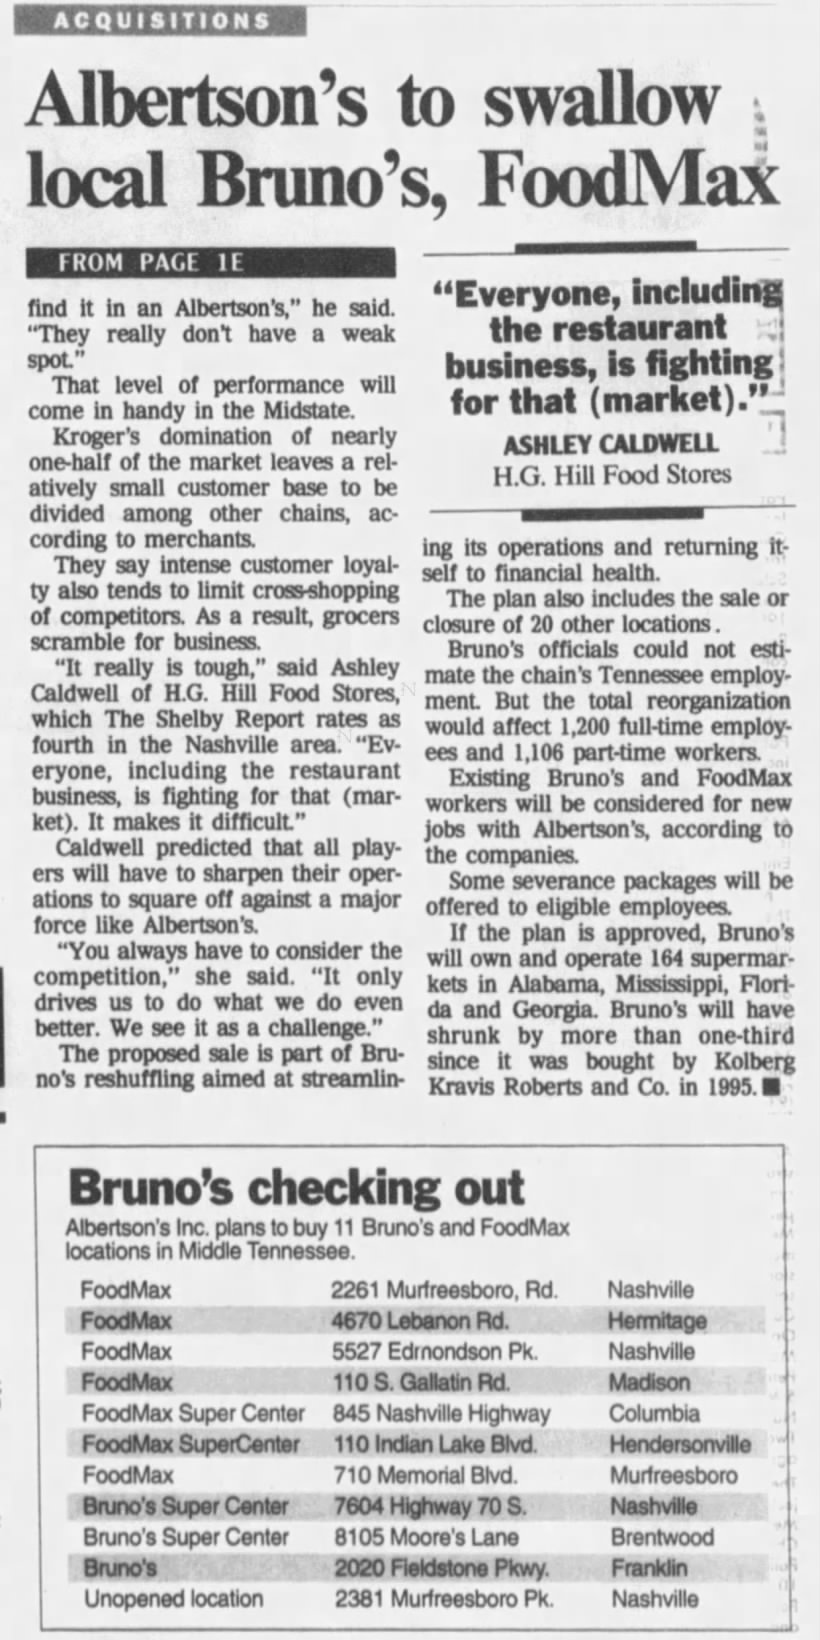 Albertsons to swallow local Bruno's, FoodMax (page 2)